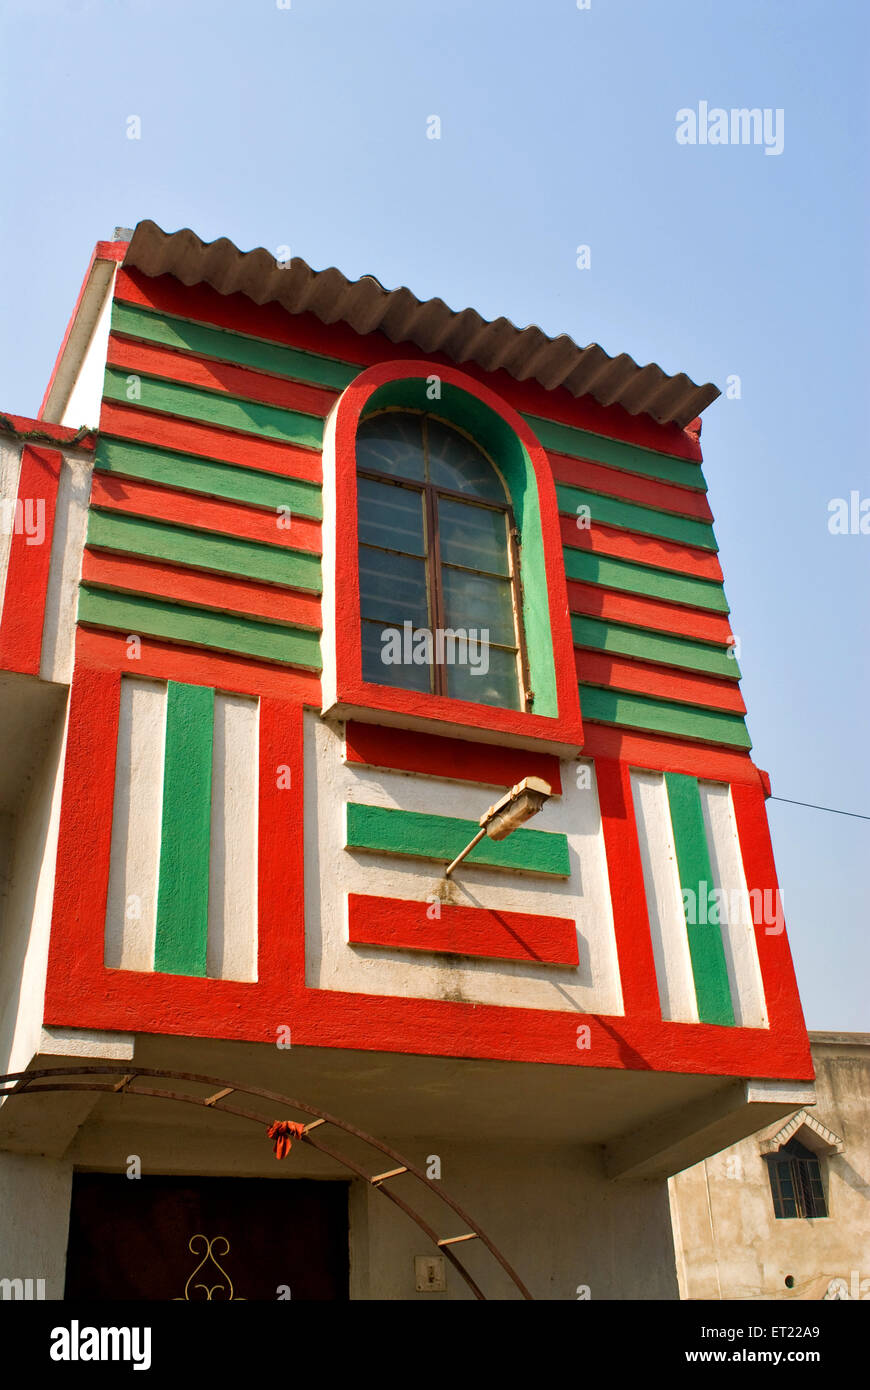 small colorful house, Asansol, Paschim Bardhaman district, West Bengal, India, Asia Stock Photo